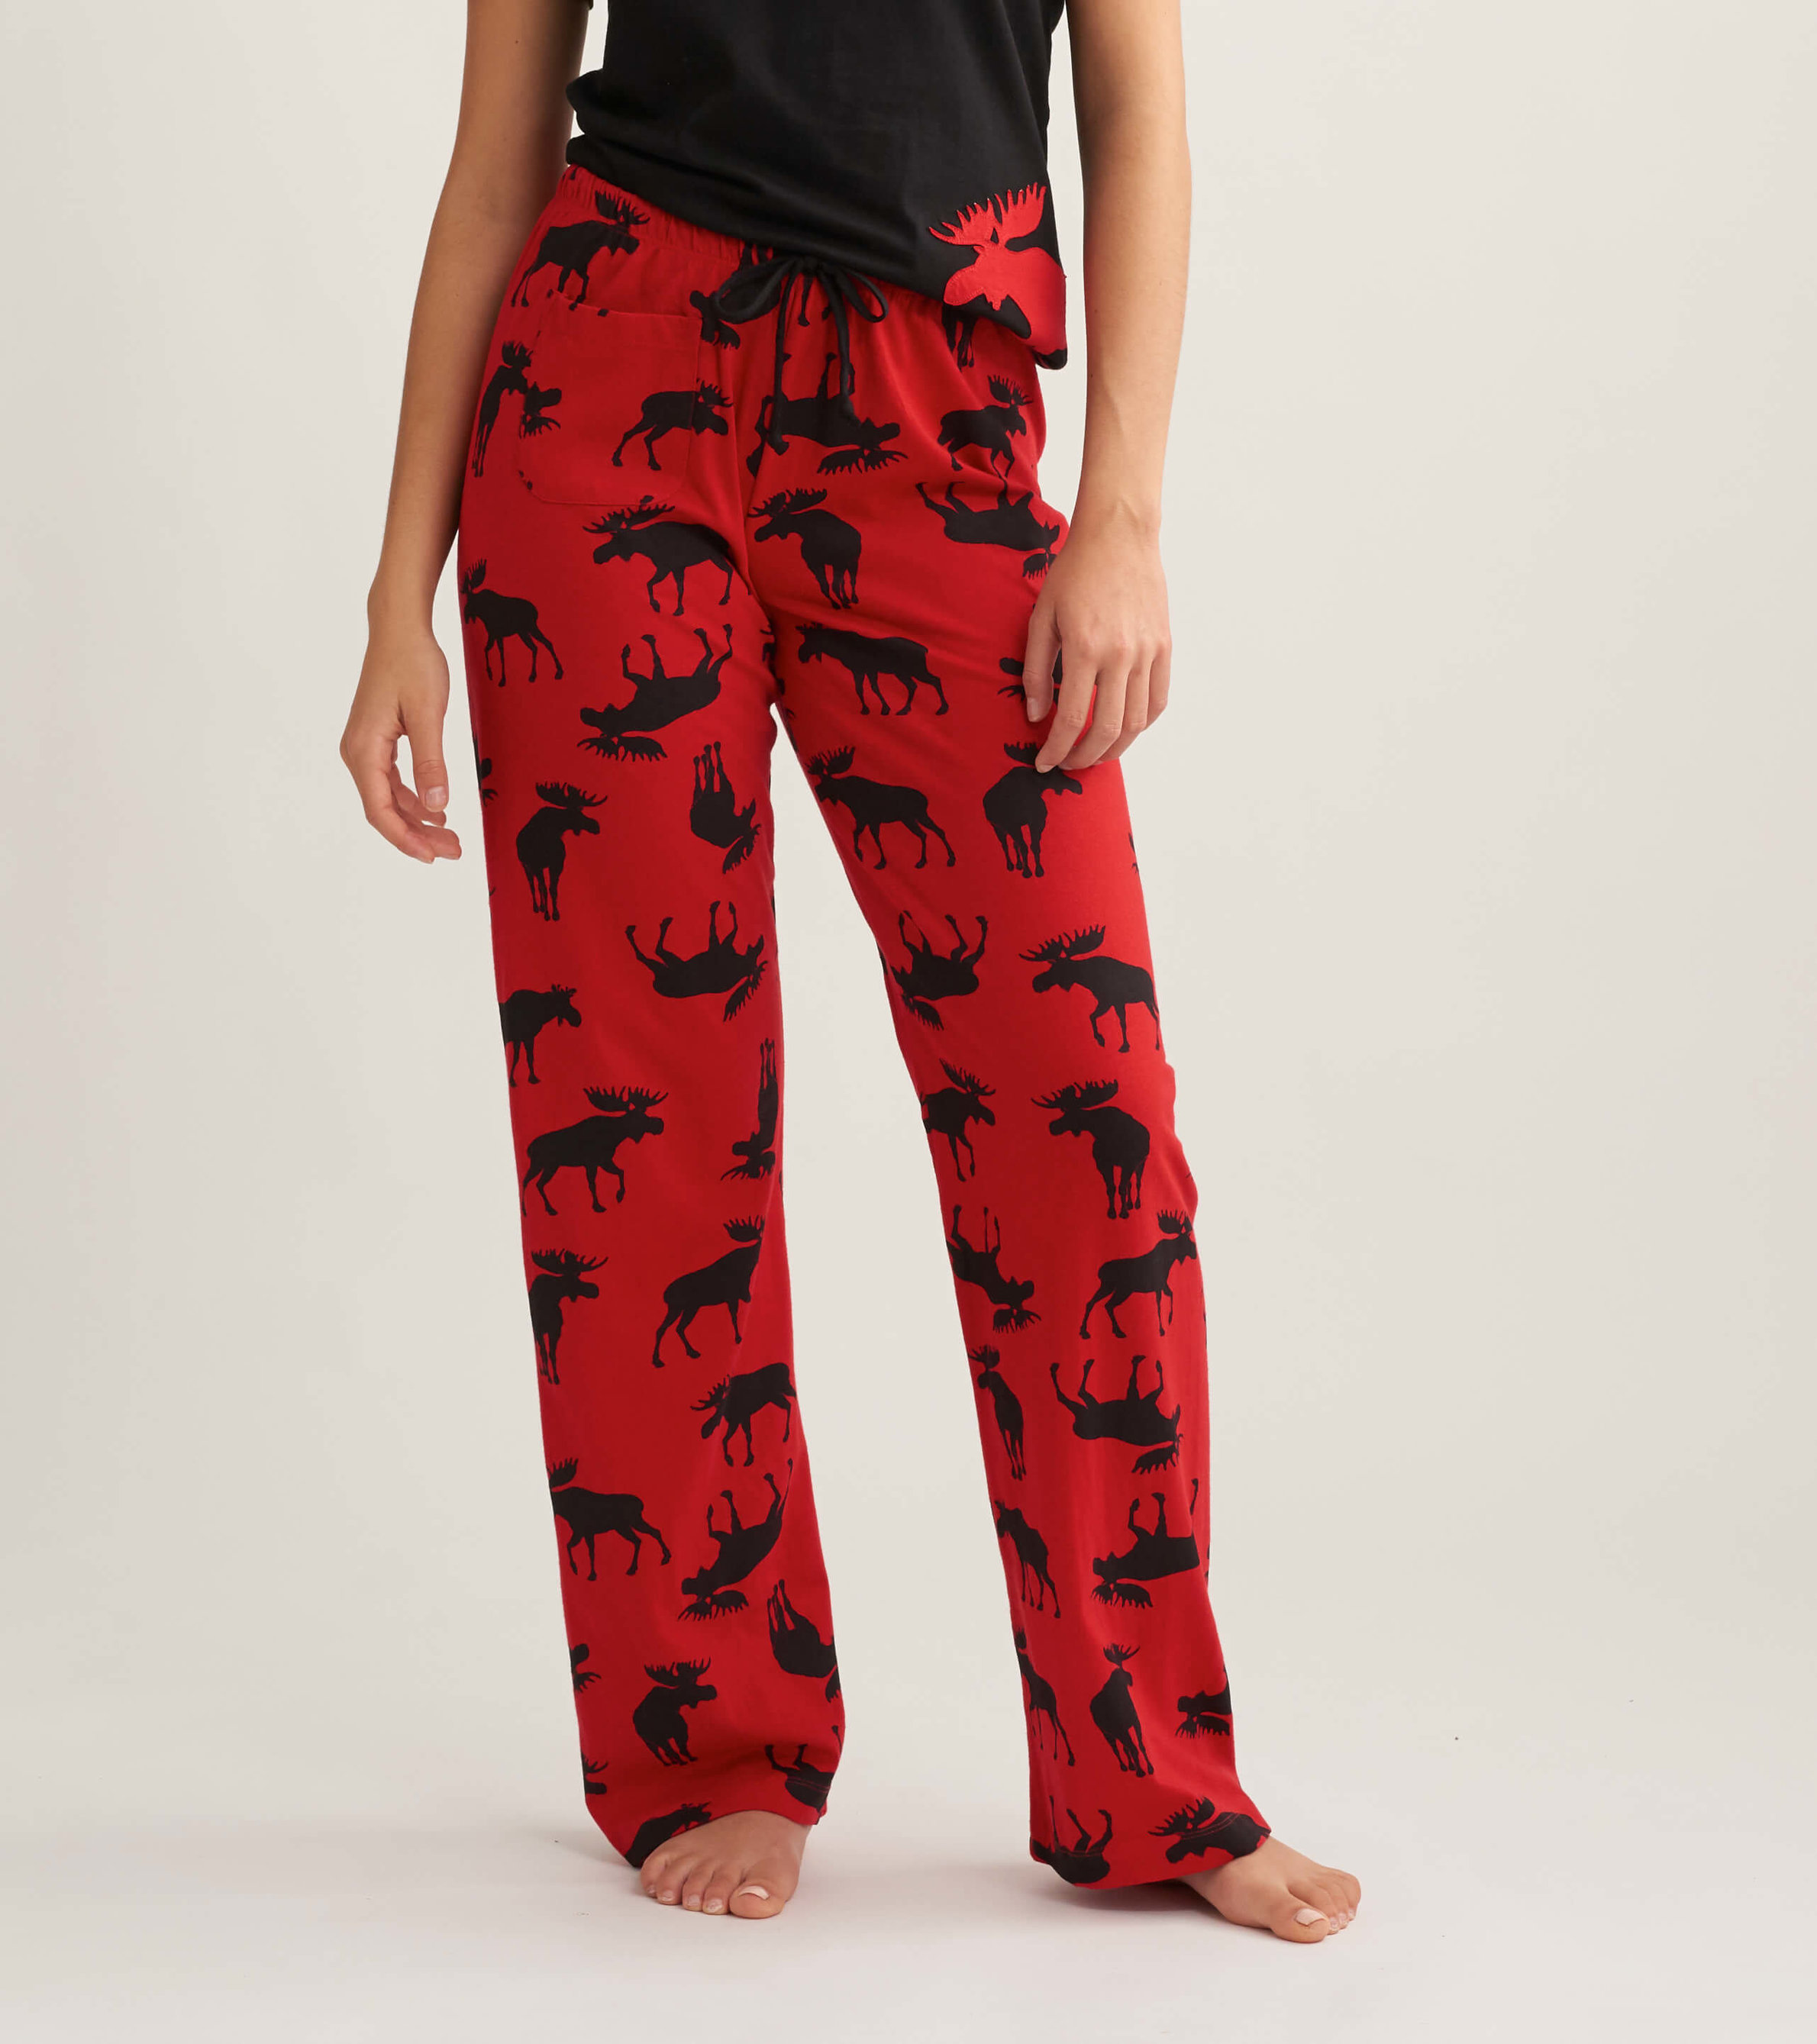 https://cdn.littlebluehouse.com/product_images/moose-on-red-womens-jersey-pajama-pants/PA2WIMO001_jpg/pdp_zoom.jpg?c=1604493258&locale=uk_en